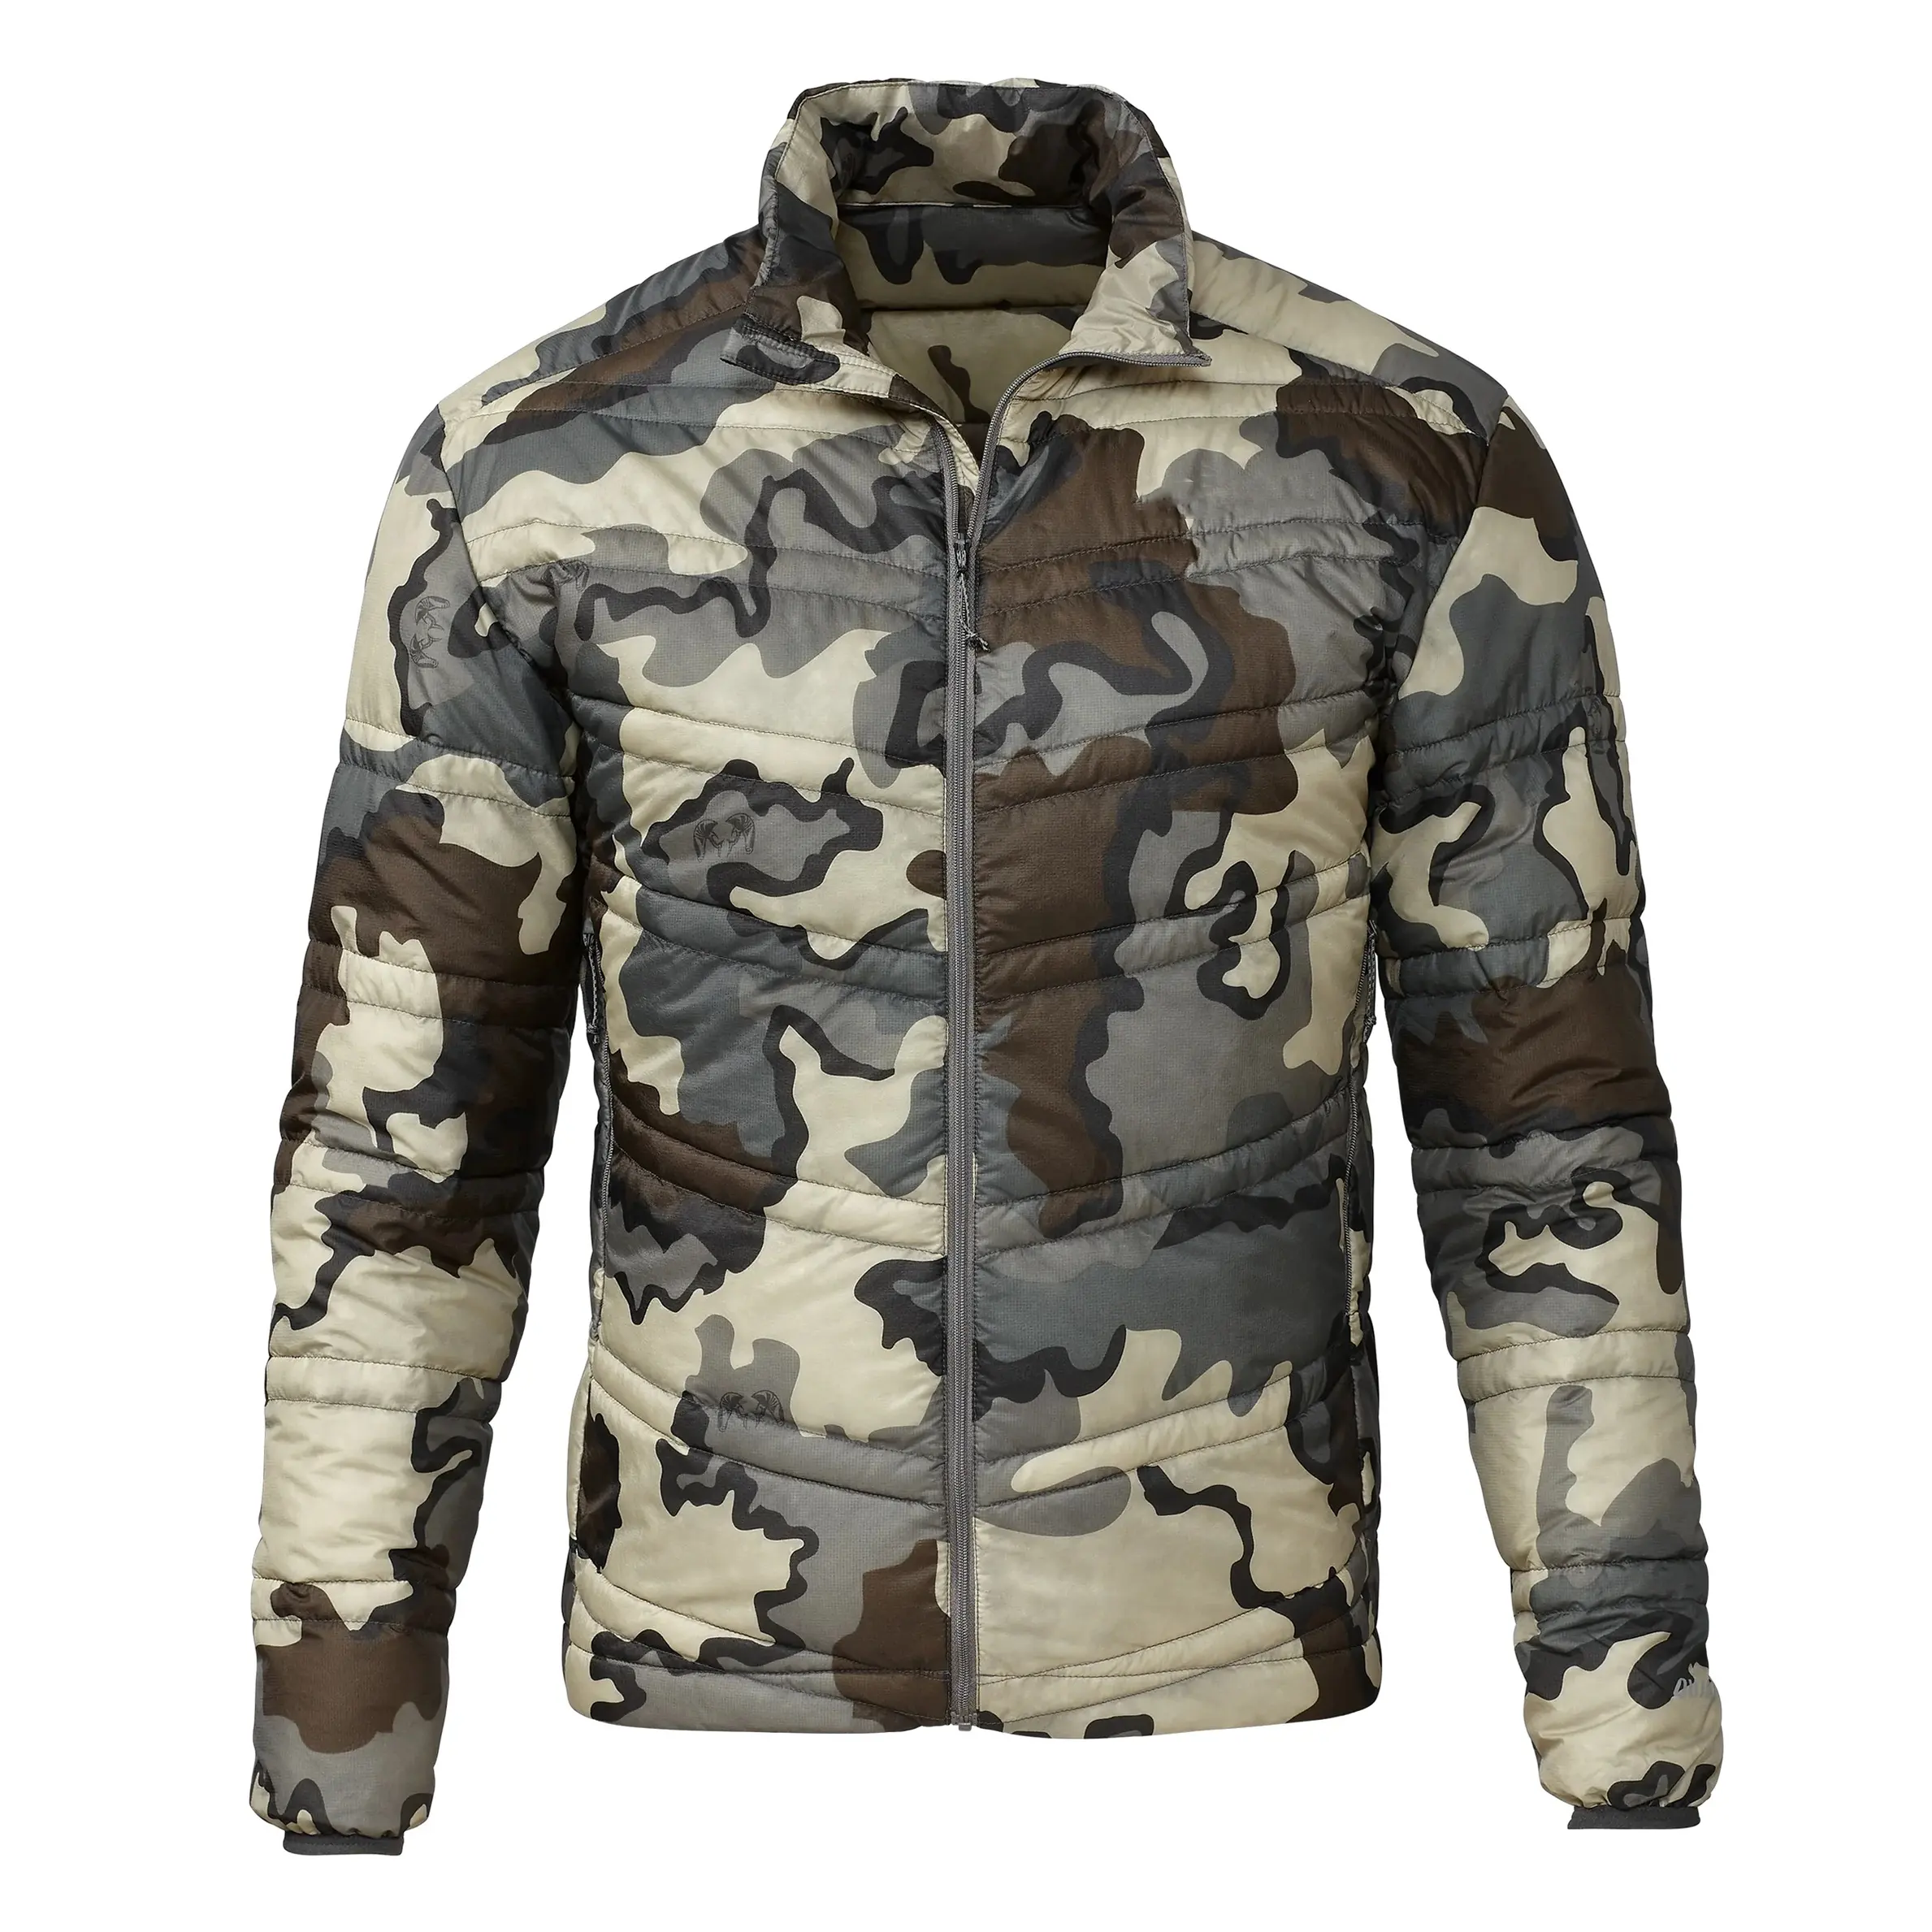 Highly Recommended Multi-camo Outdoor Animal Hunting Down Jacket Custom Embroidery Logo Cheap Price Men's Hunting puffy jacket